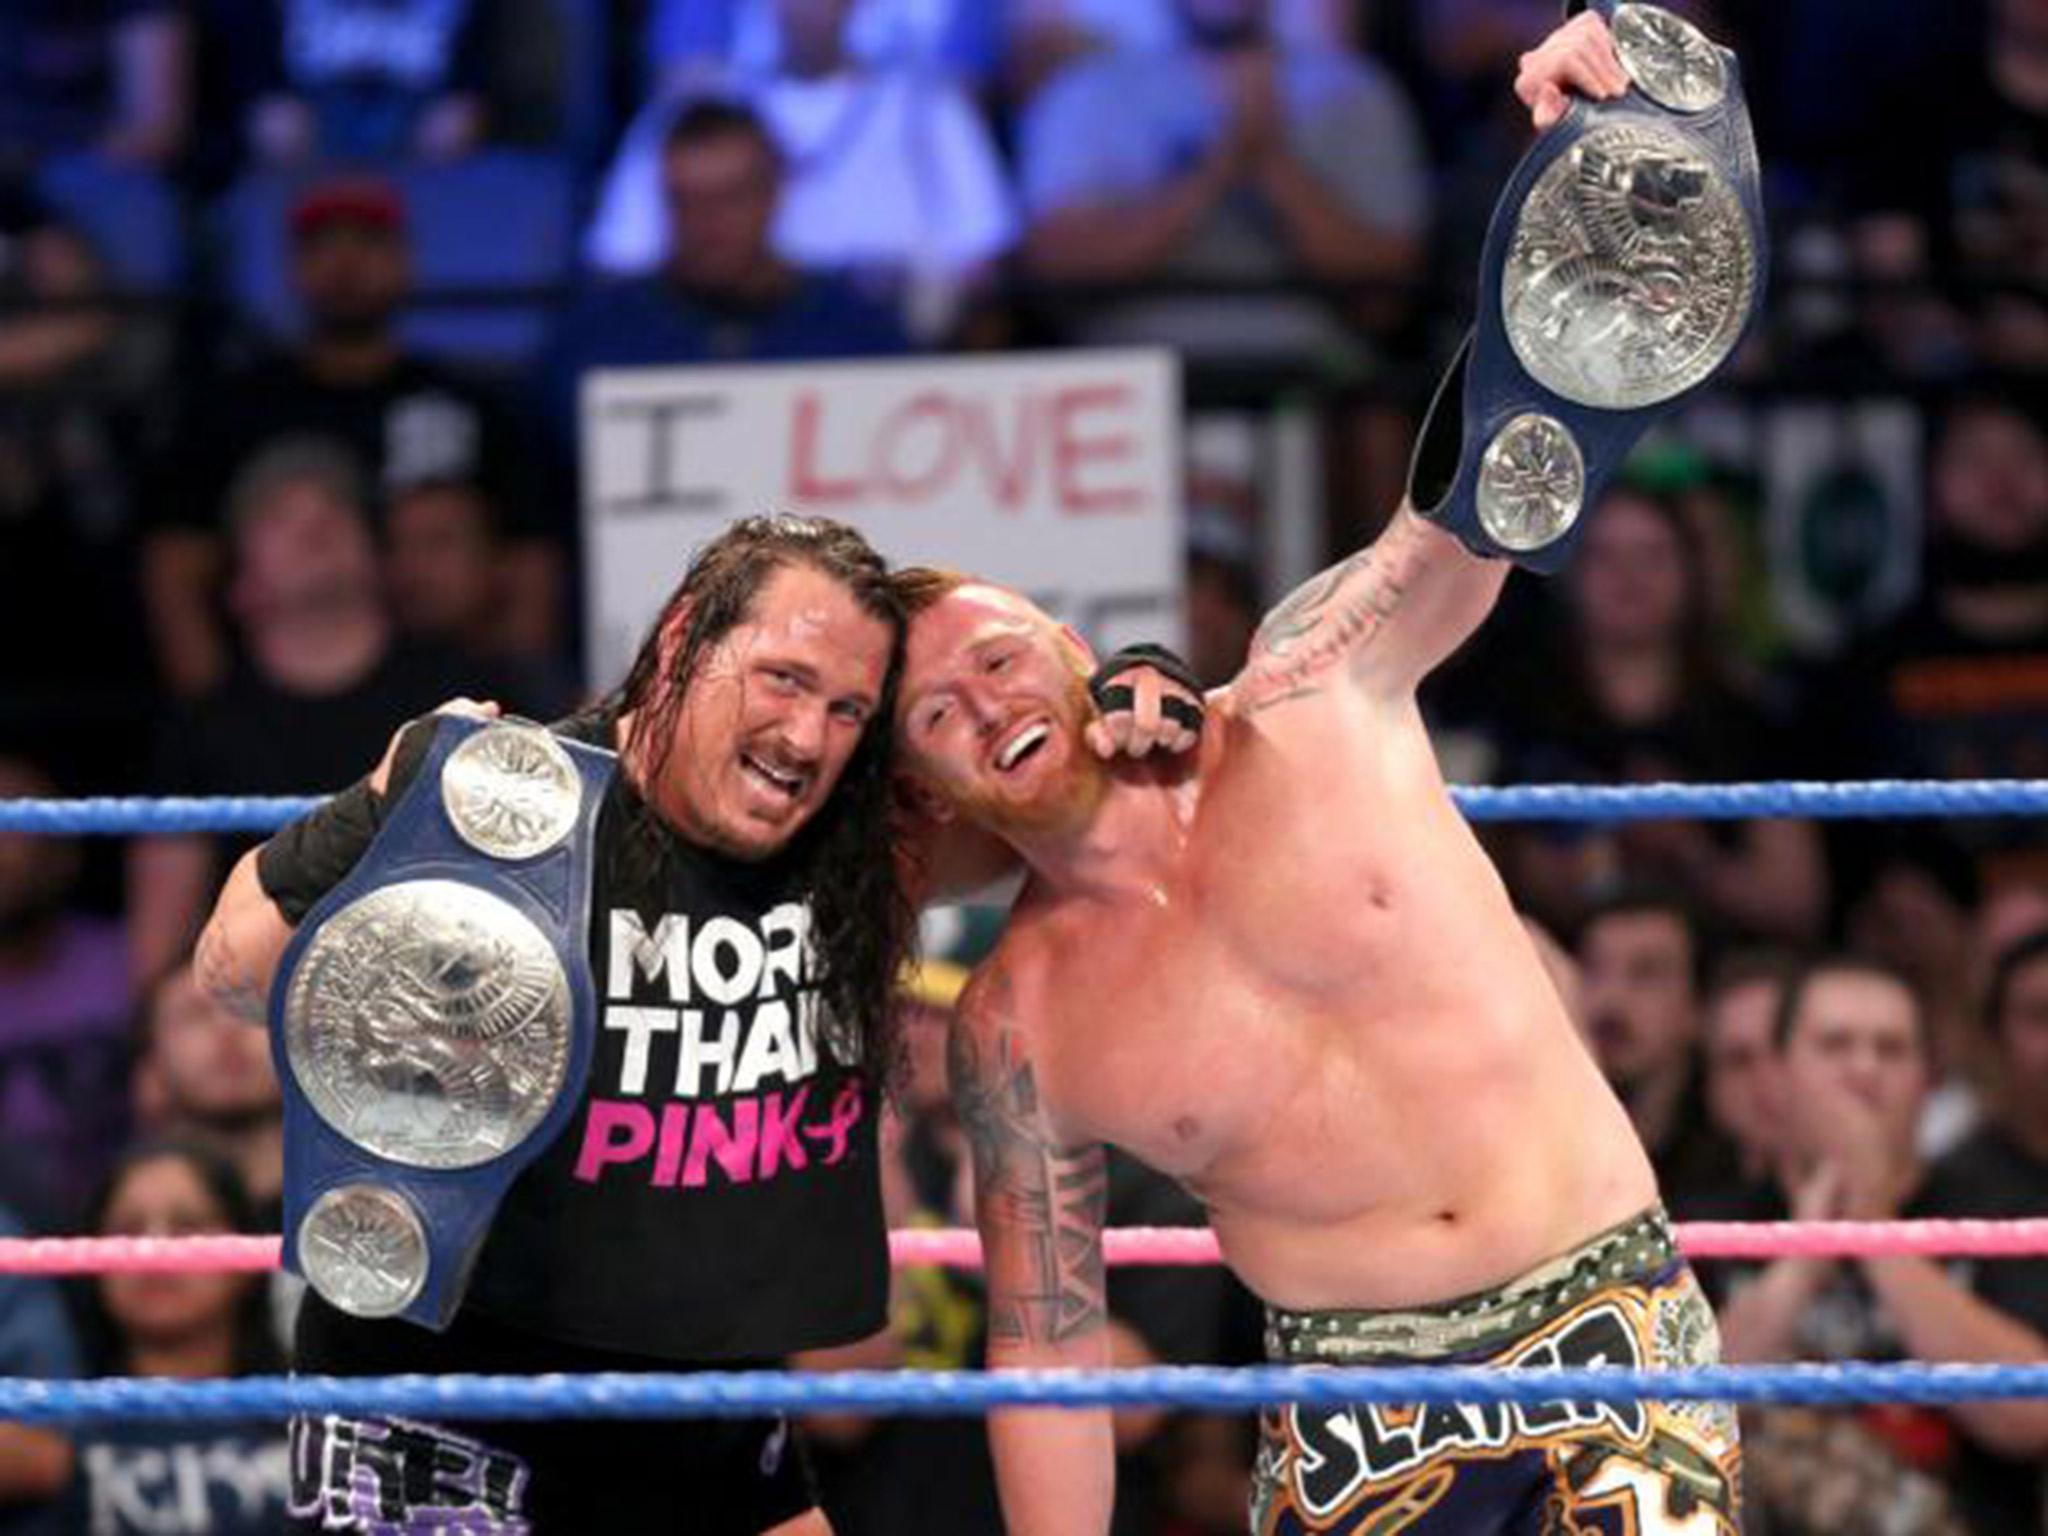 &#13;
Rhyno and Slater celebrate retaining the tag team titles &#13;